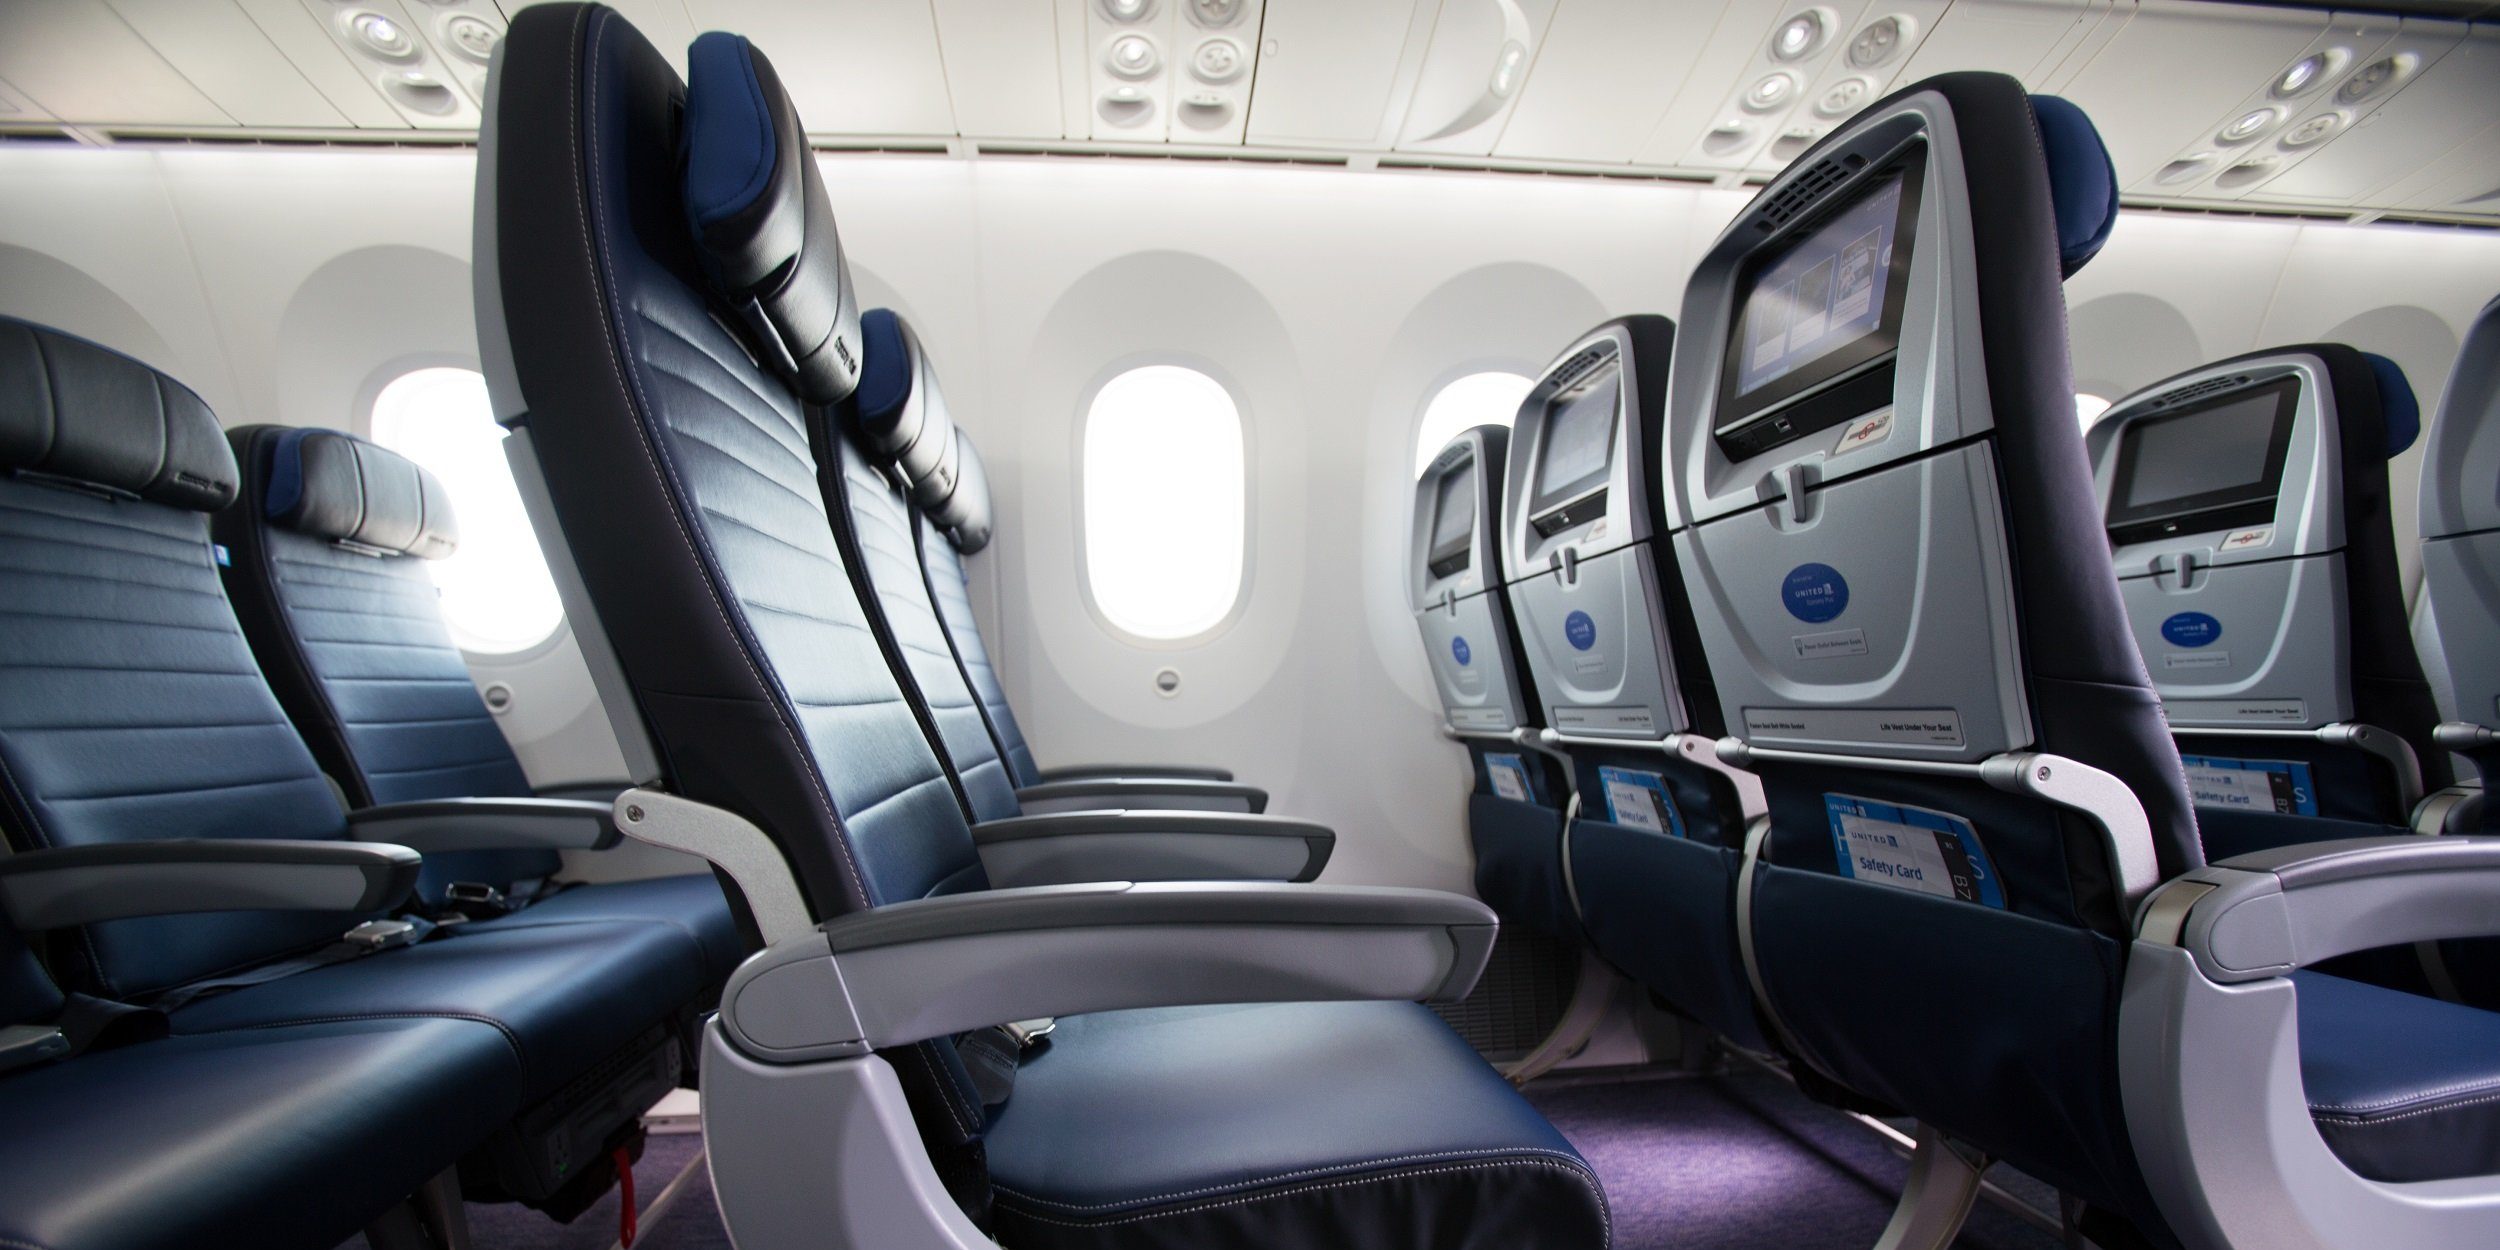 The Best Ways to Fly Economy Using Points and Miles